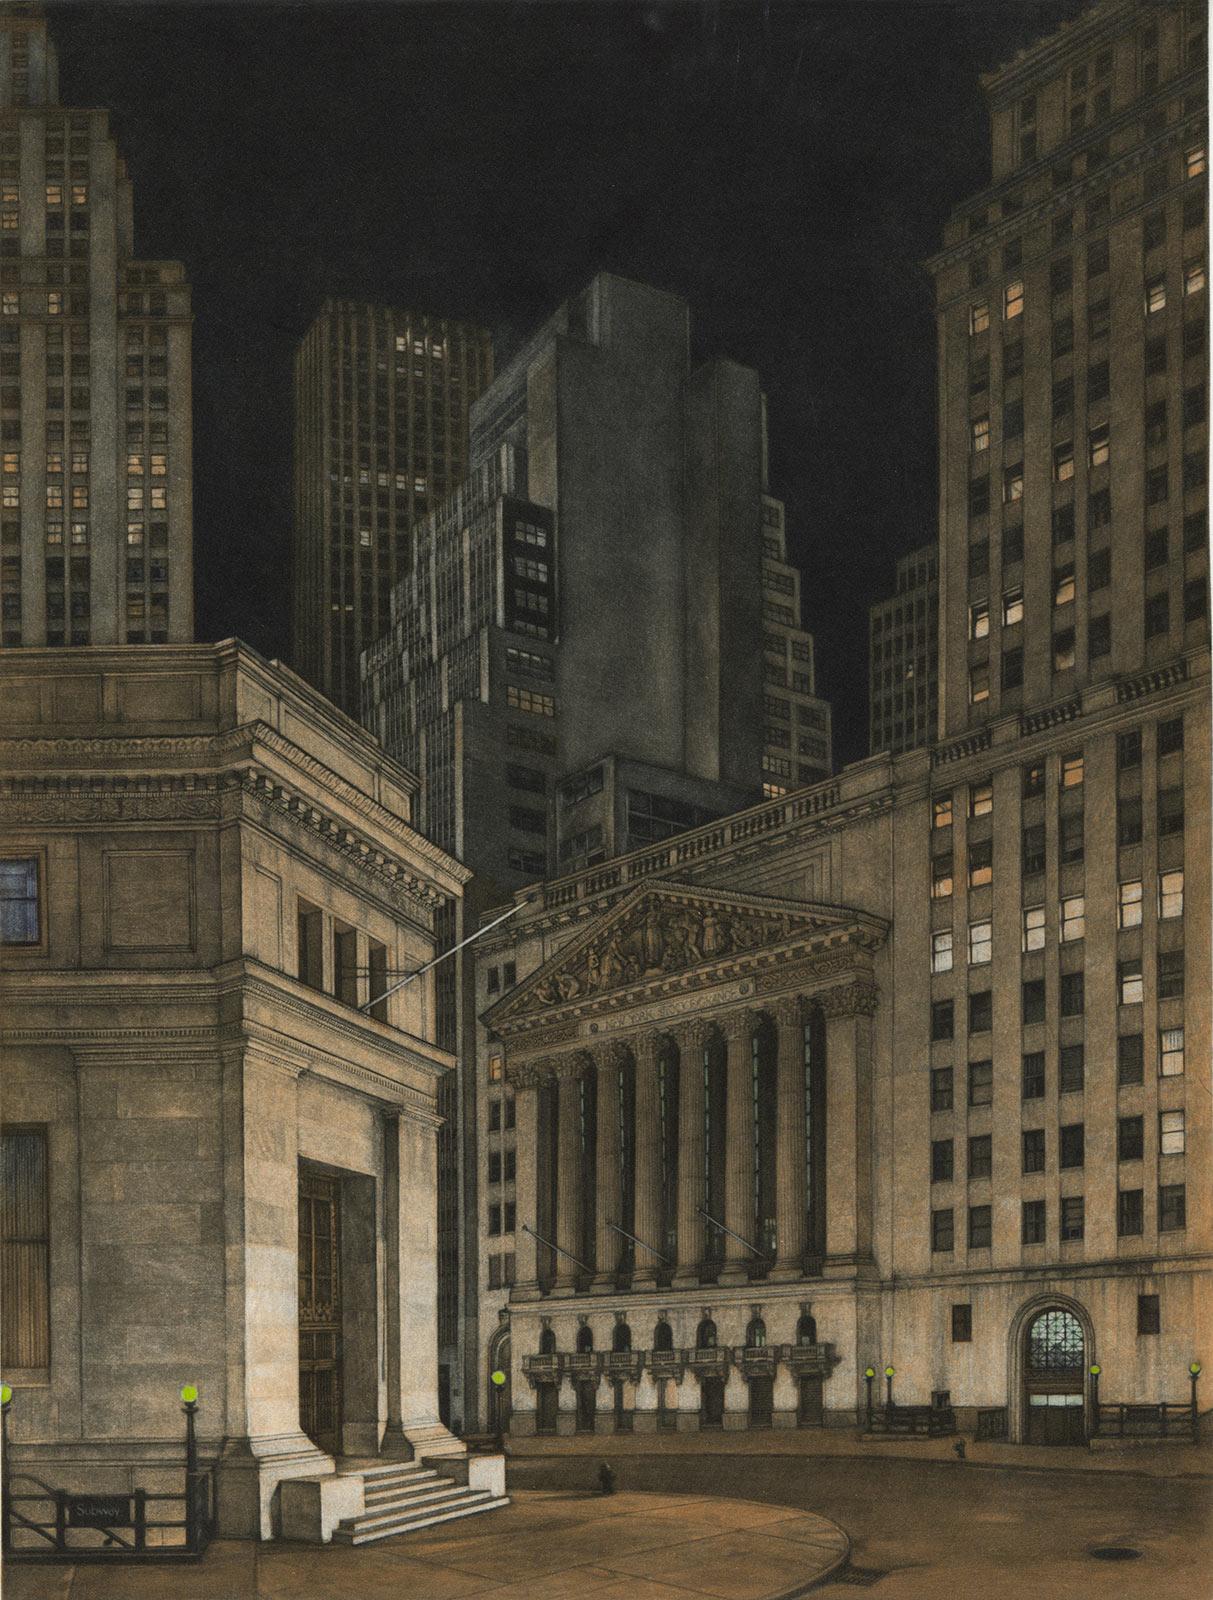 New York Stock Exchange (Symbolic icon of Wall St.'s vast power and wealth)